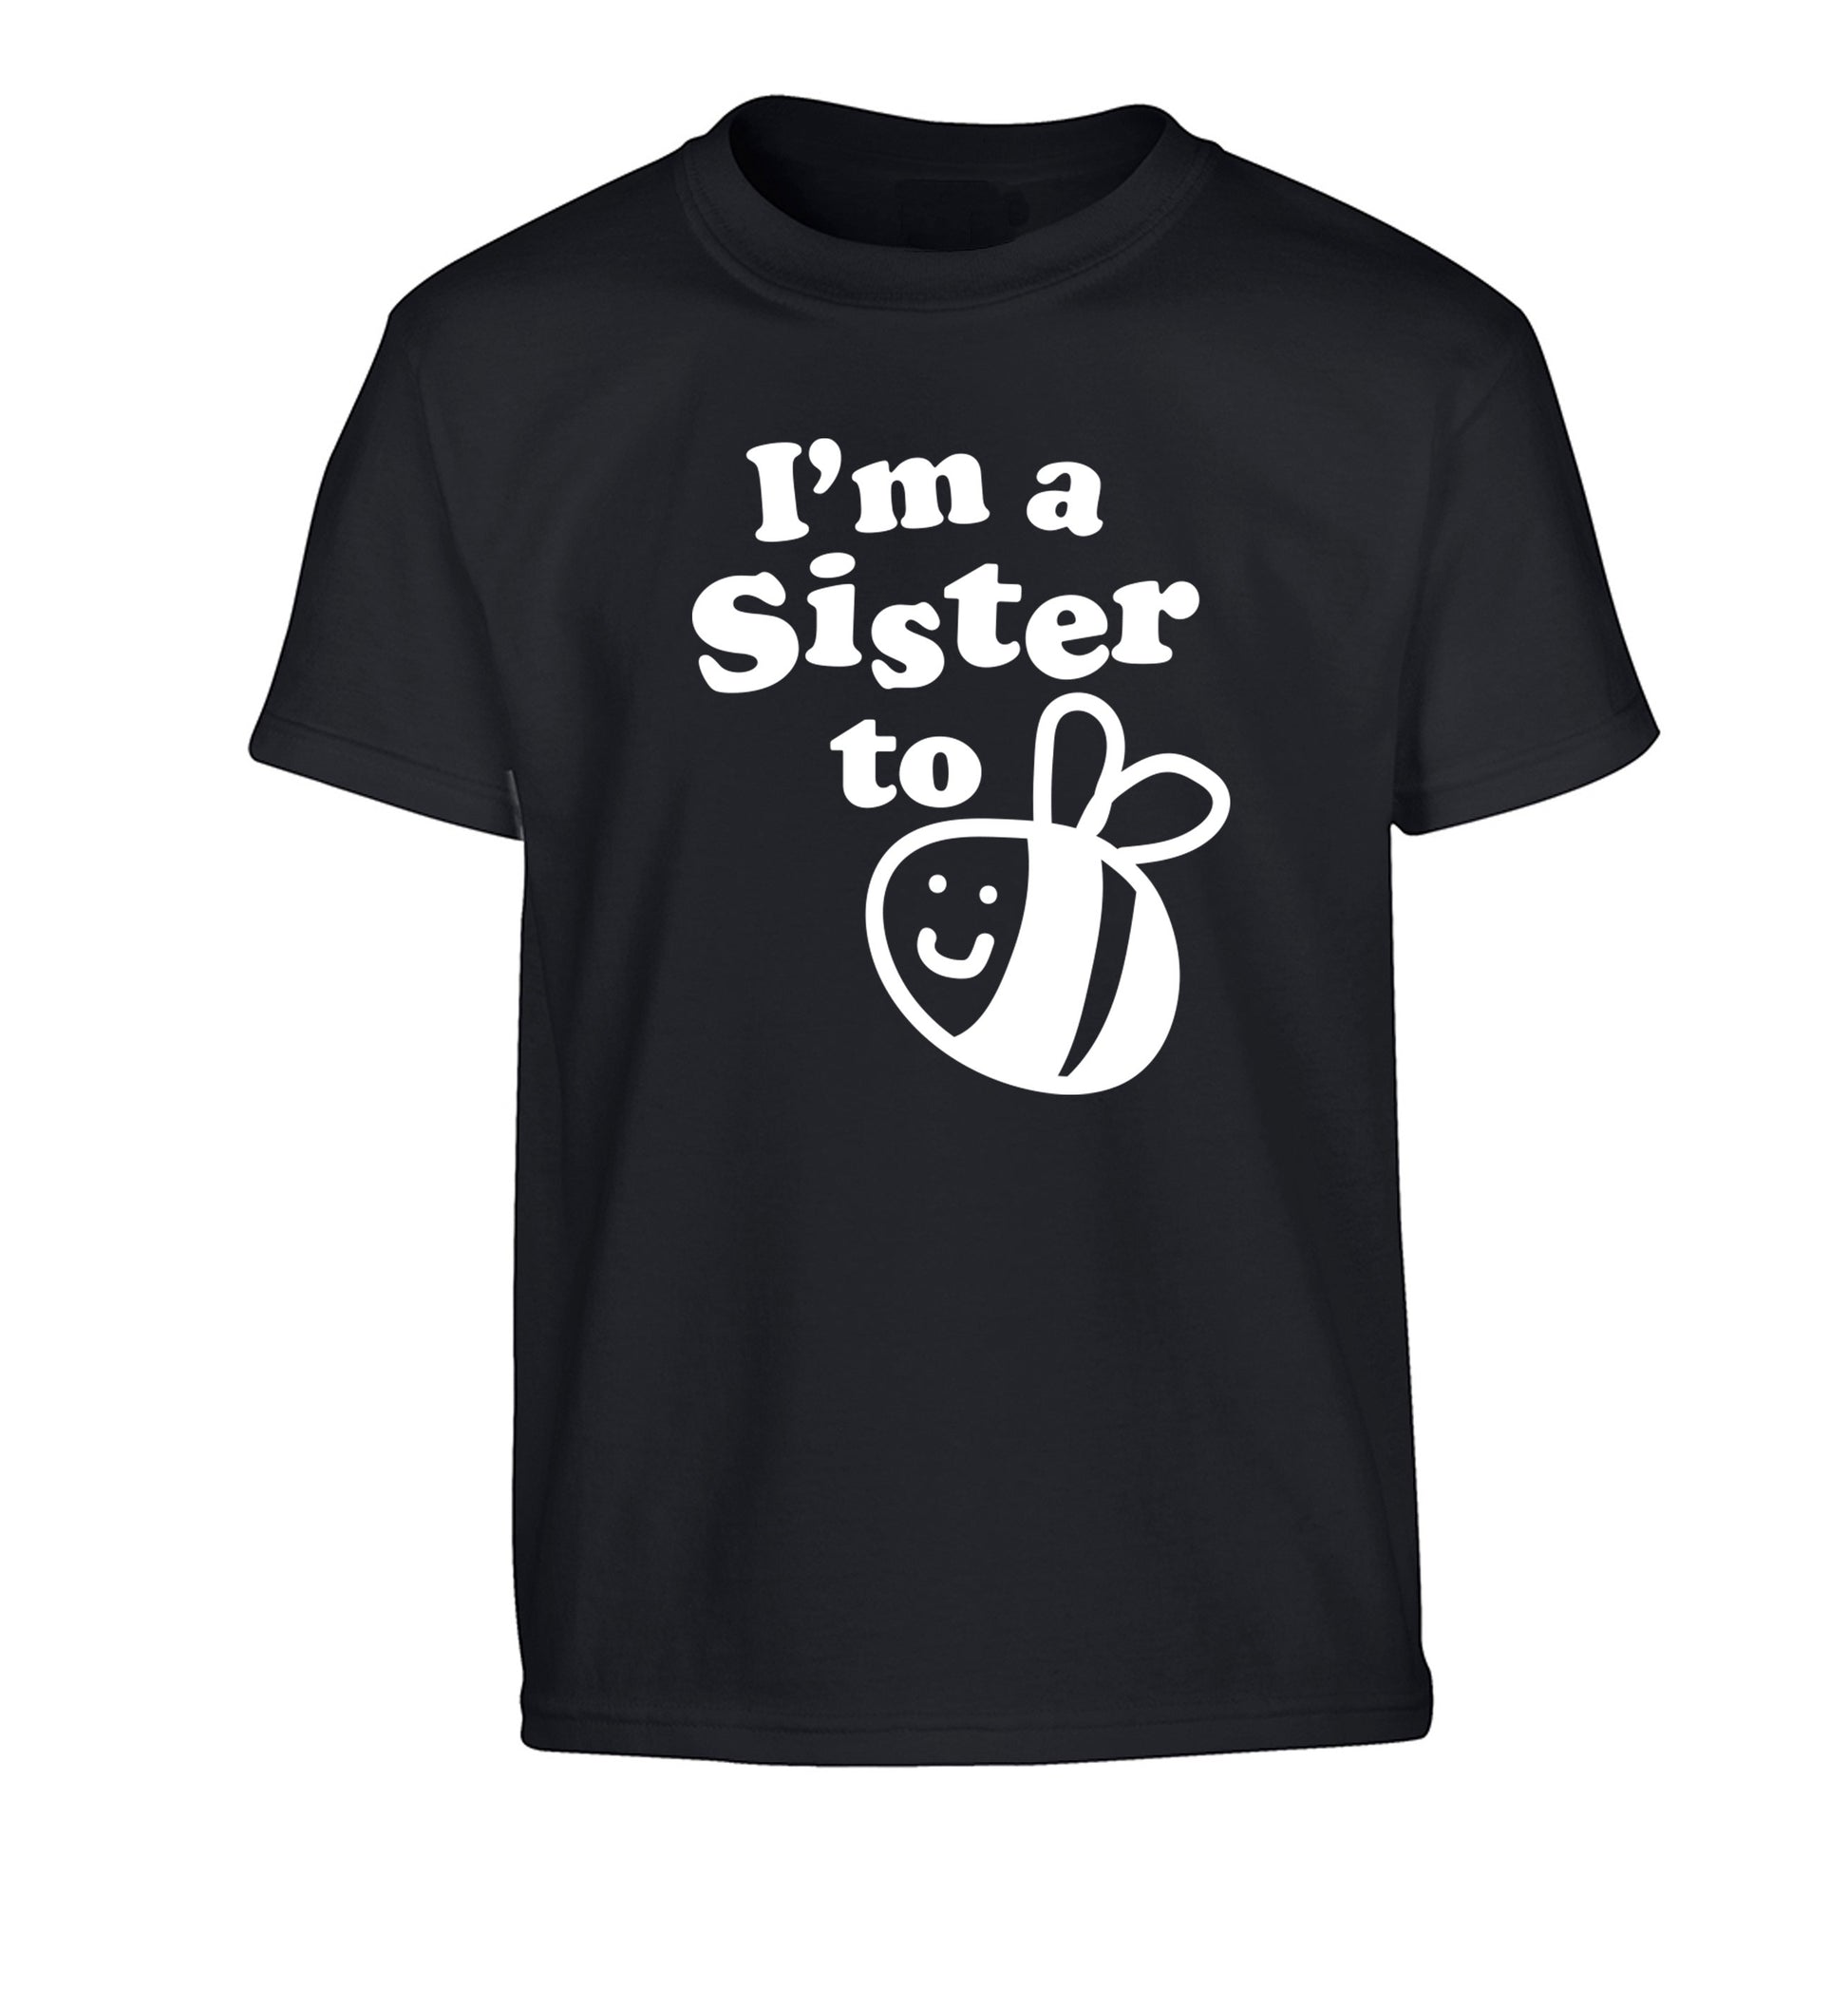 I'm a sister to be Children's black Tshirt 12-14 Years